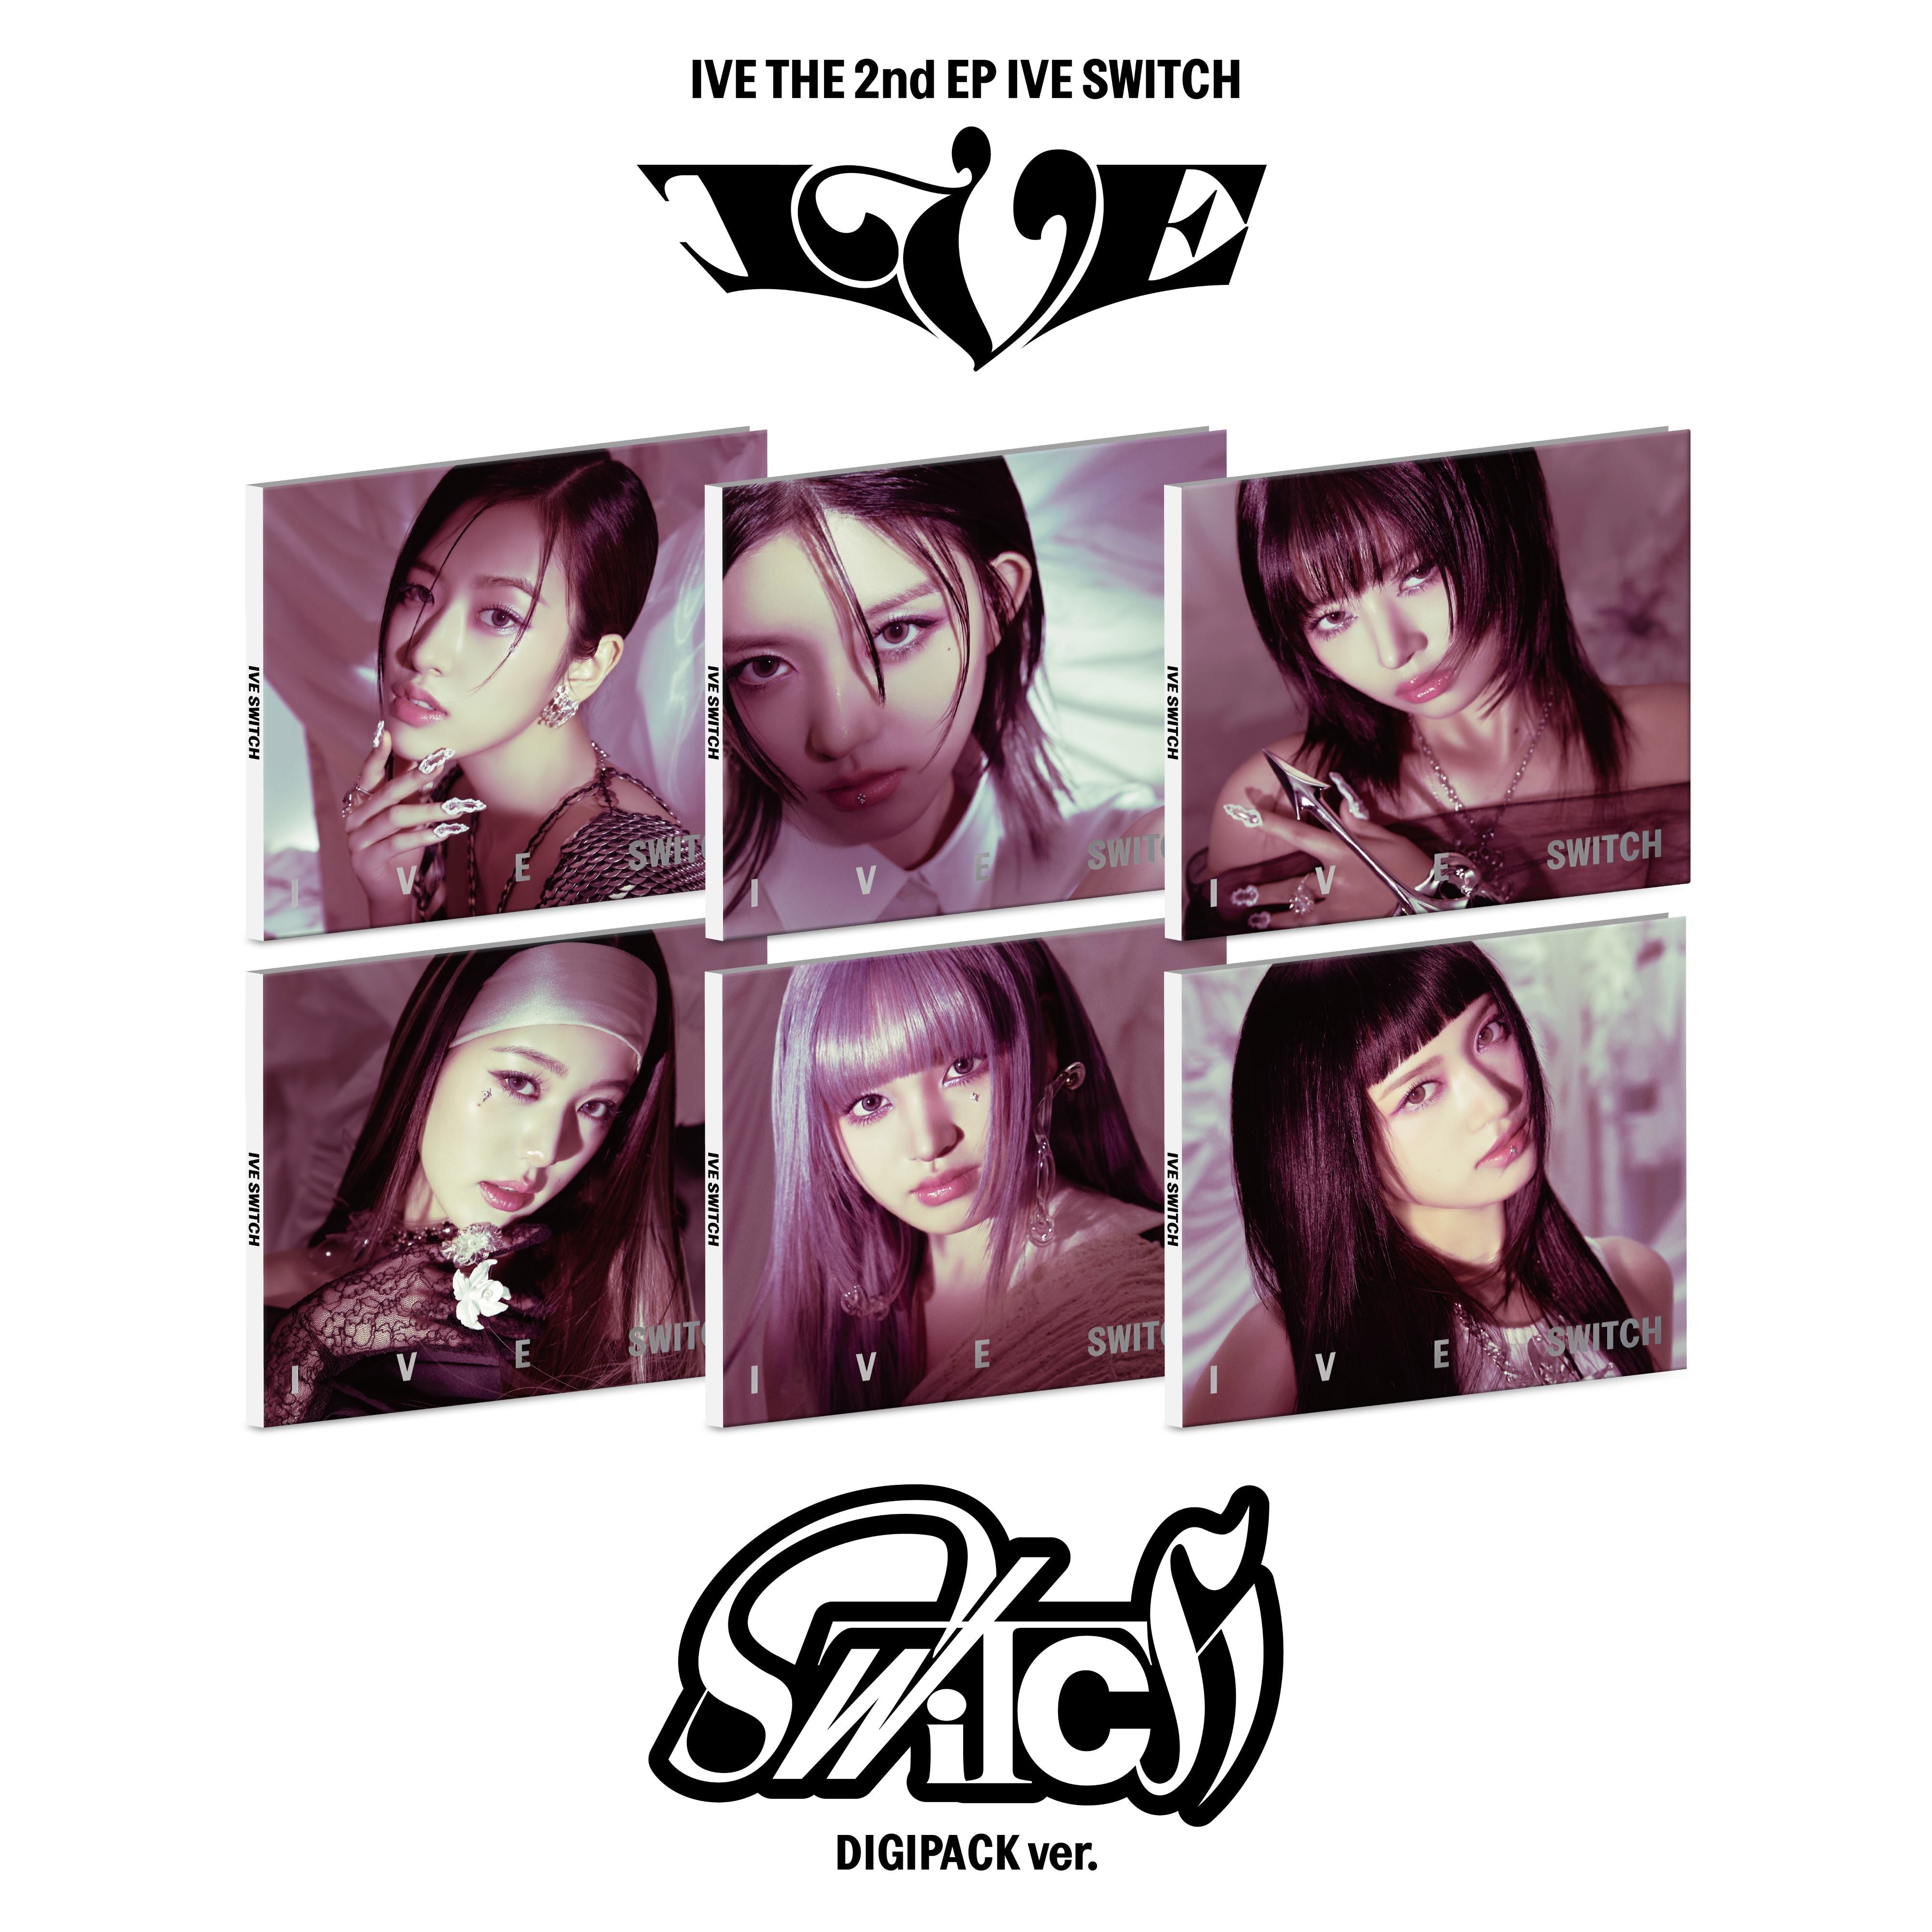 IVE - 2ND EP [IVE SWITCH] DIGIPACK Ver. (Limited Ver.) Kpop Album - Kpop Wholesale | Seoufly